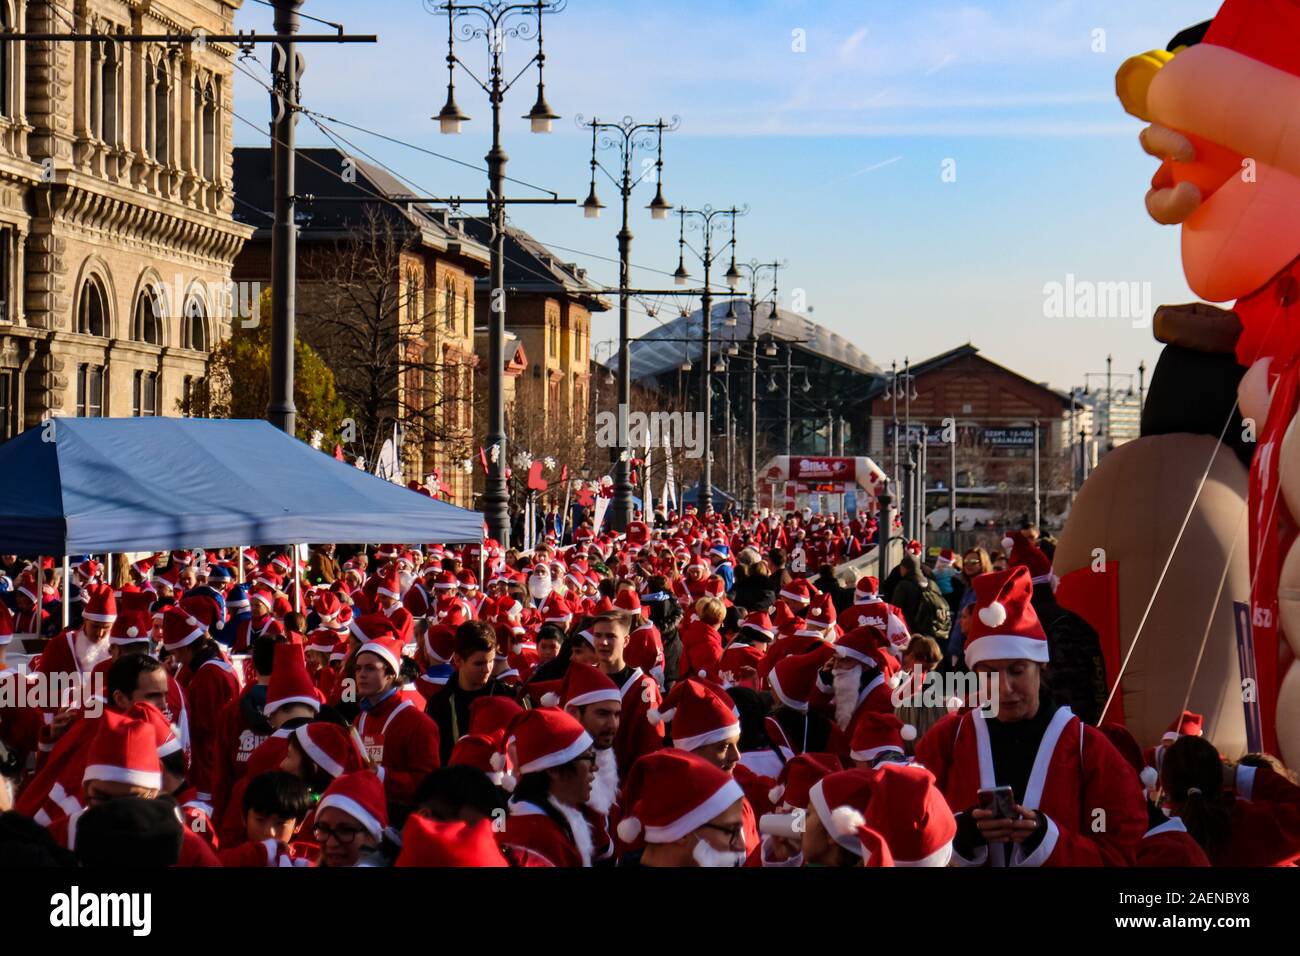 Budapest, Hungary - December 8, 2019: Participants in Santa Clause costumes at the finishing line of the 7th Santa Claus Charity Run of Budapest, capital of Hungary. Stock Photo